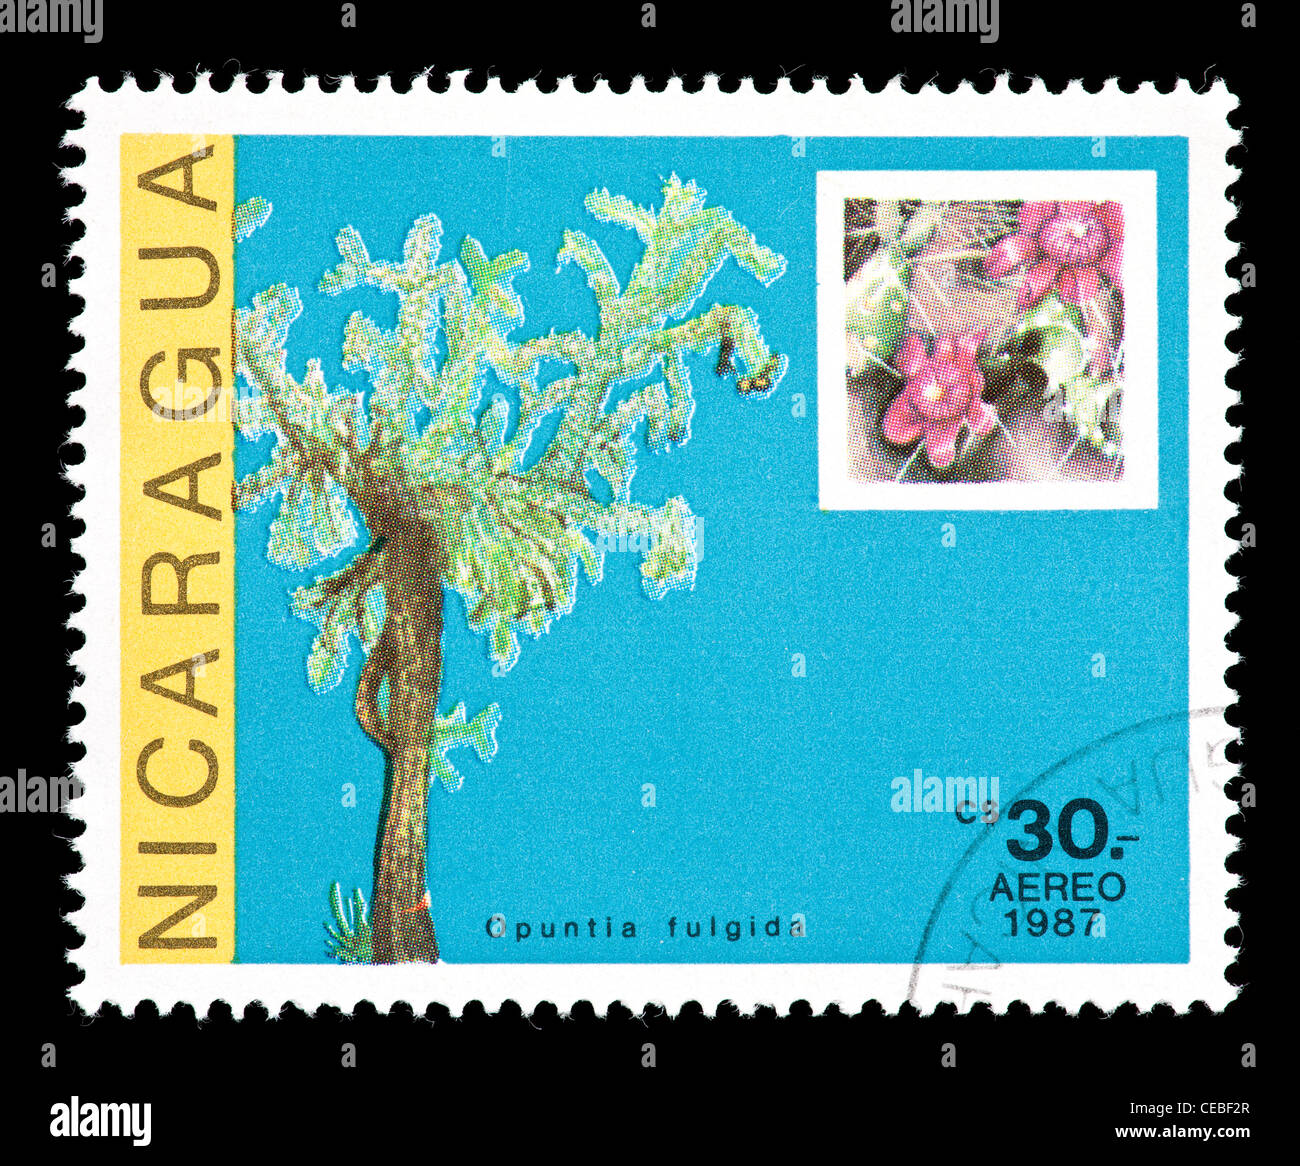 Postage stamp from Nicaragua depicting cacti and flowers (Opuntia fulgida) Stock Photo